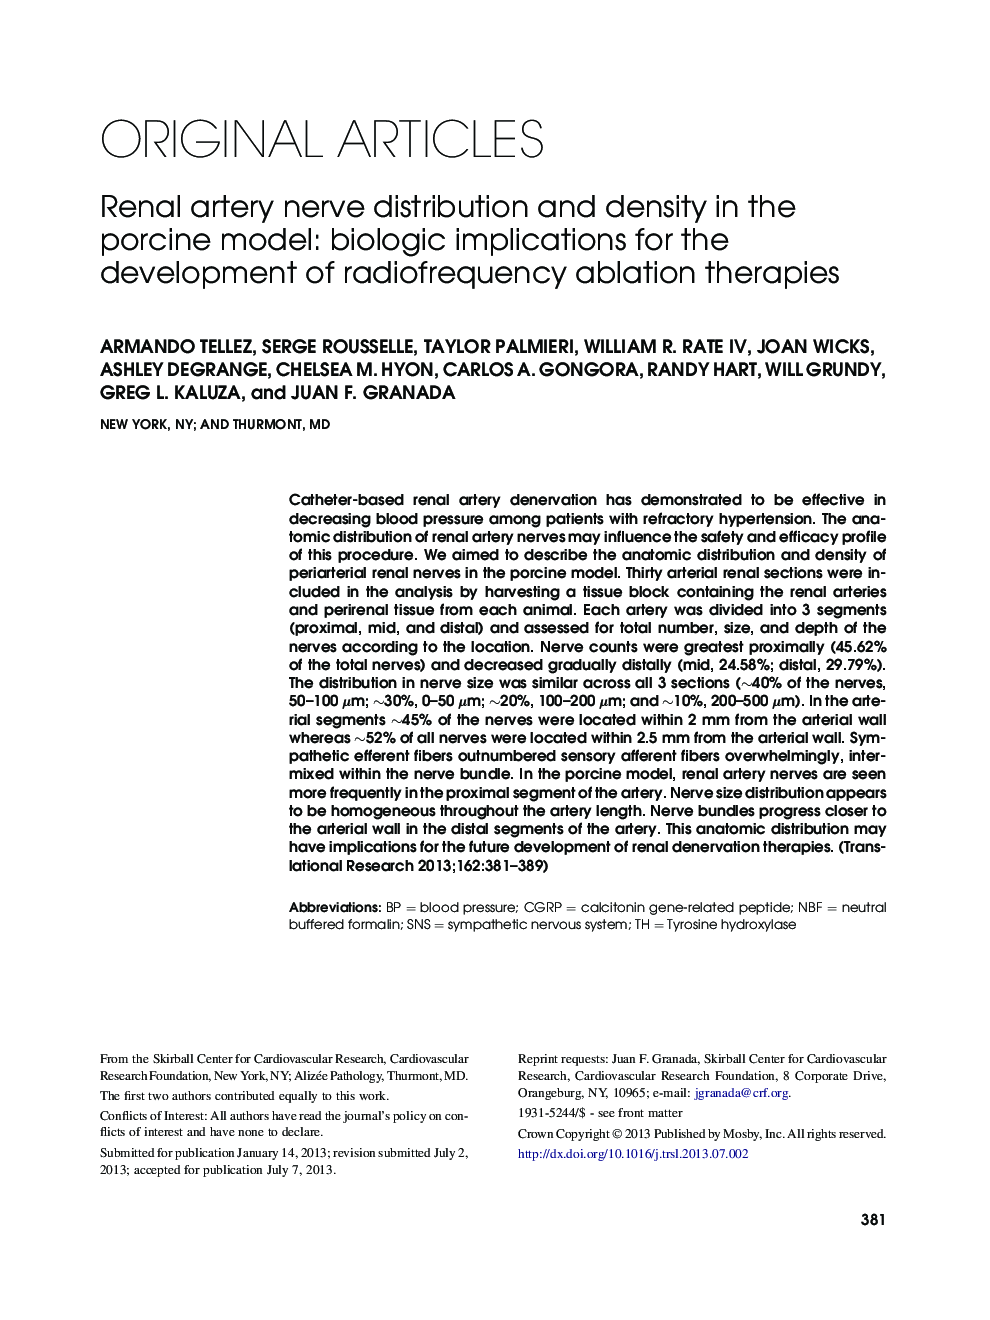 Renal artery nerve distribution and density in the porcine model: biologic implications for the development of radiofrequency ablation therapies 